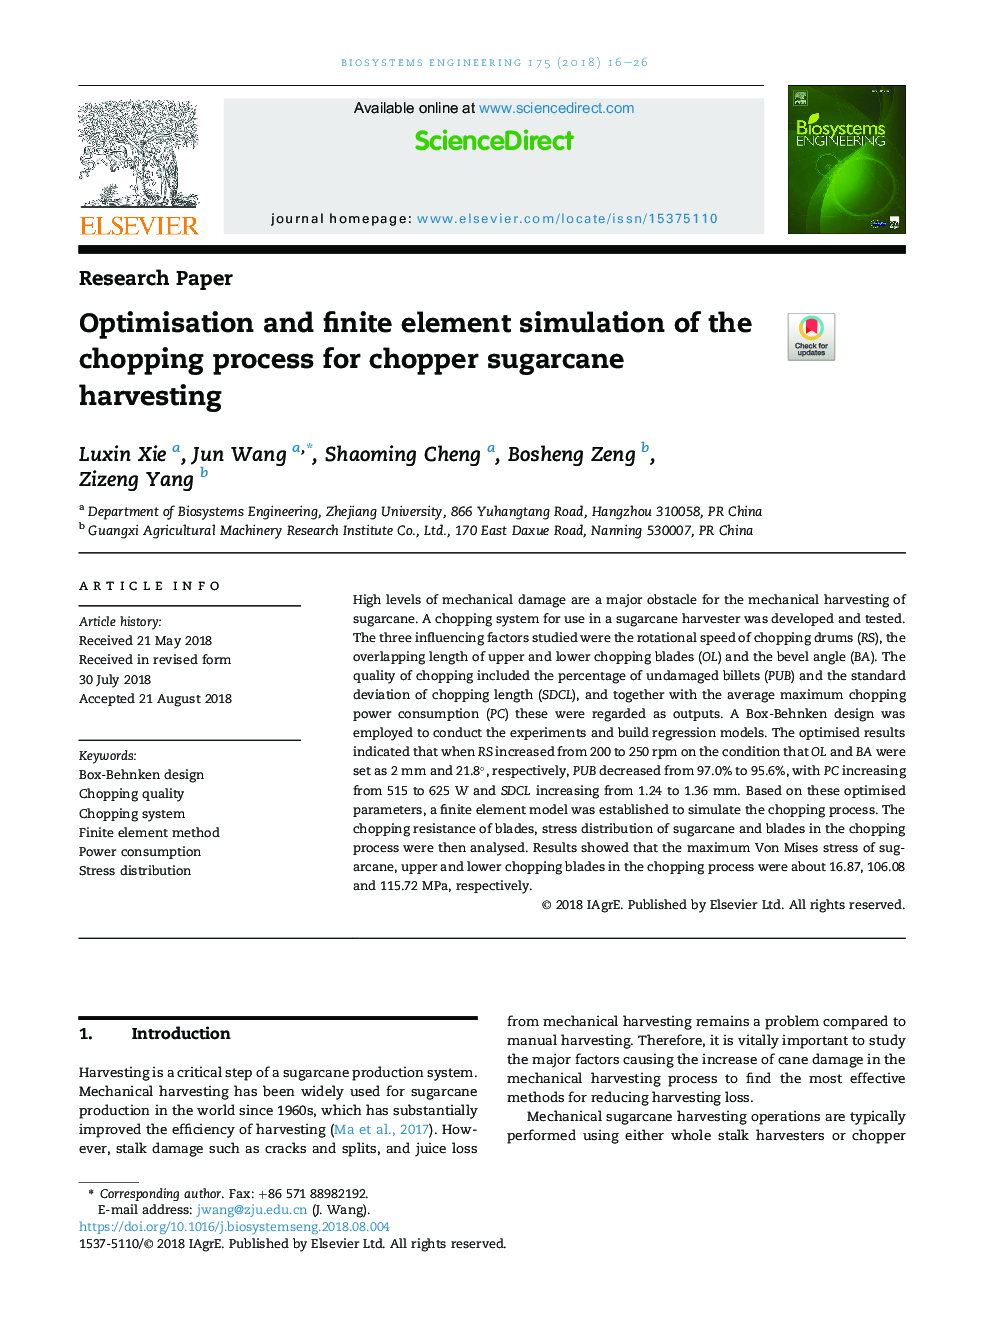 Optimisation and finite element simulation of the chopping process for chopper sugarcane harvesting